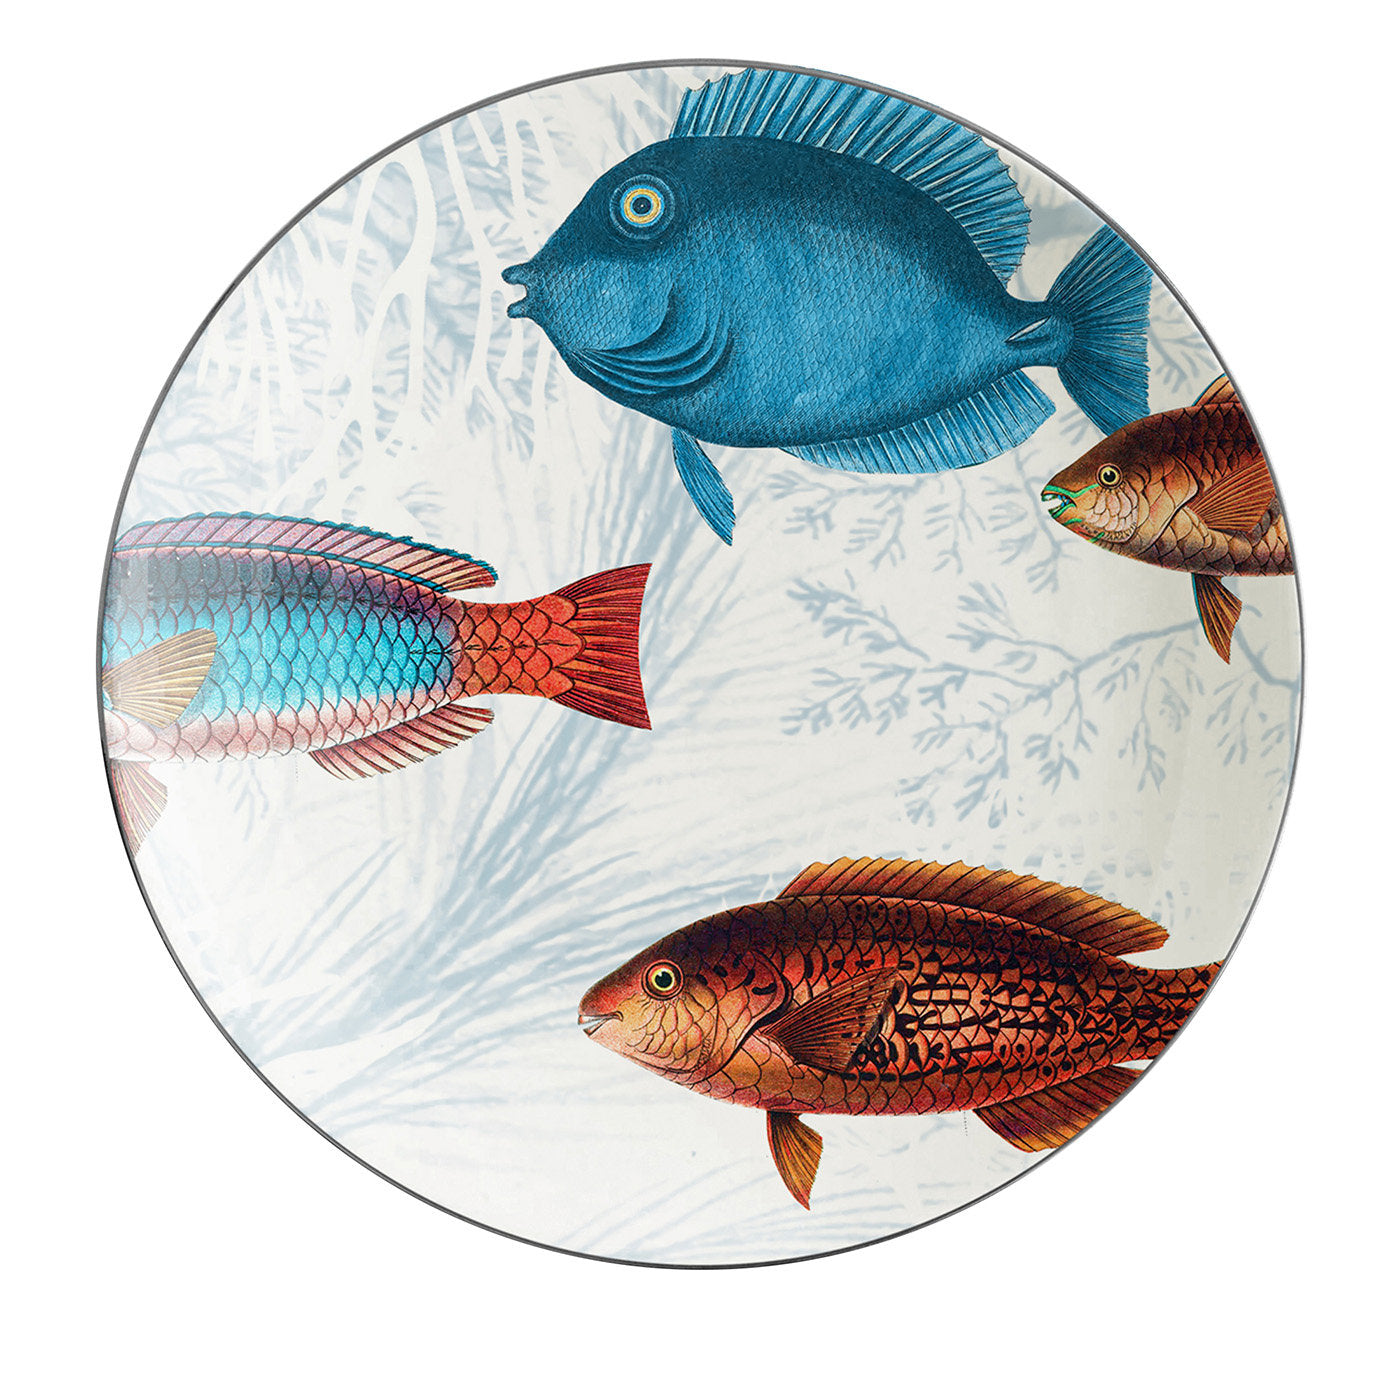 Amami Set Of 2 Porcelain Bread Plates With Tropical Fish #1 - Main view